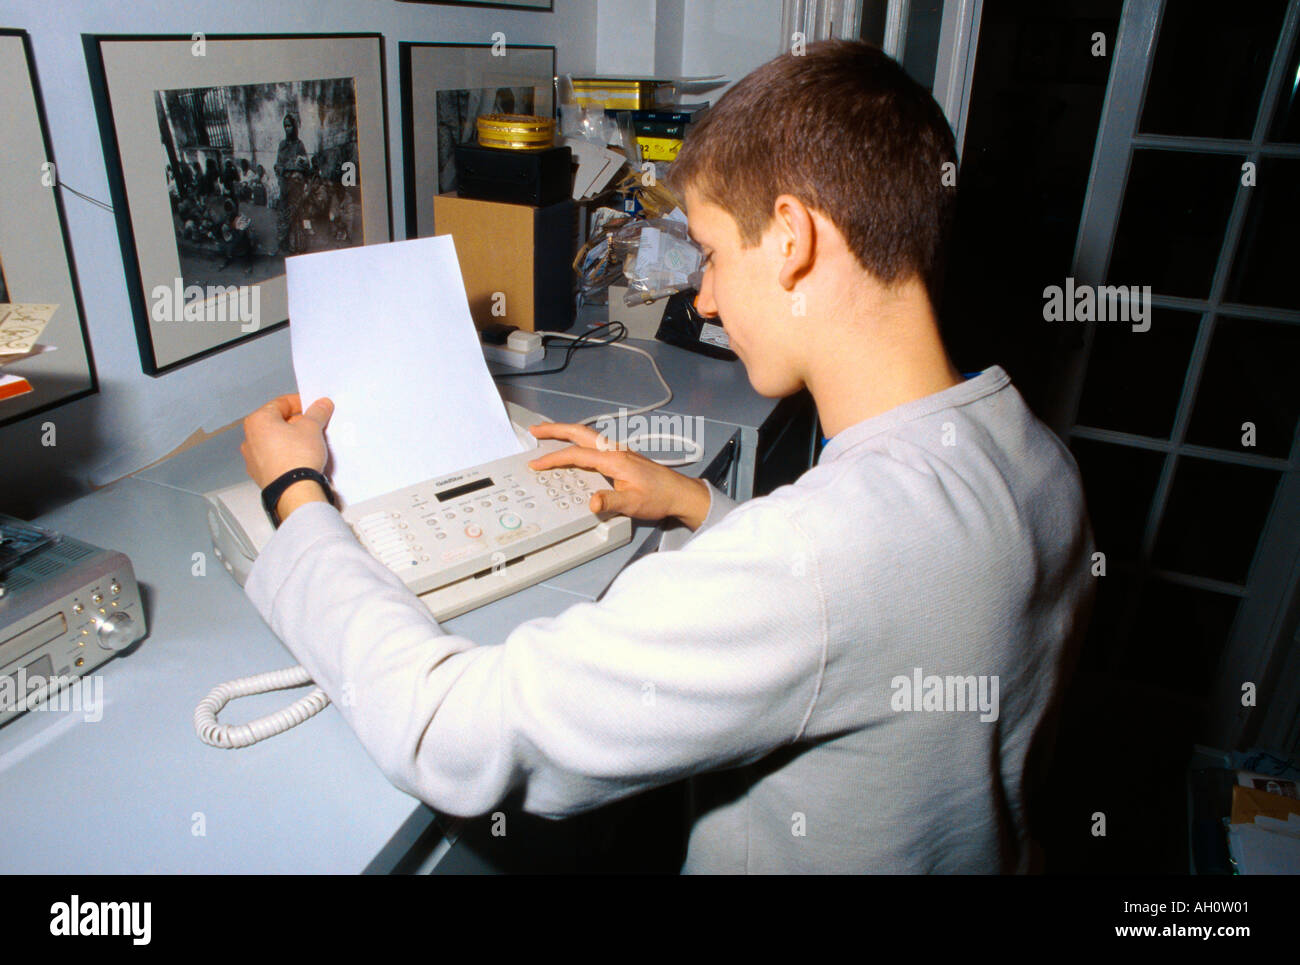 Work Experience 16 Year Old Boy Putting Fax In Machine Stock Photo